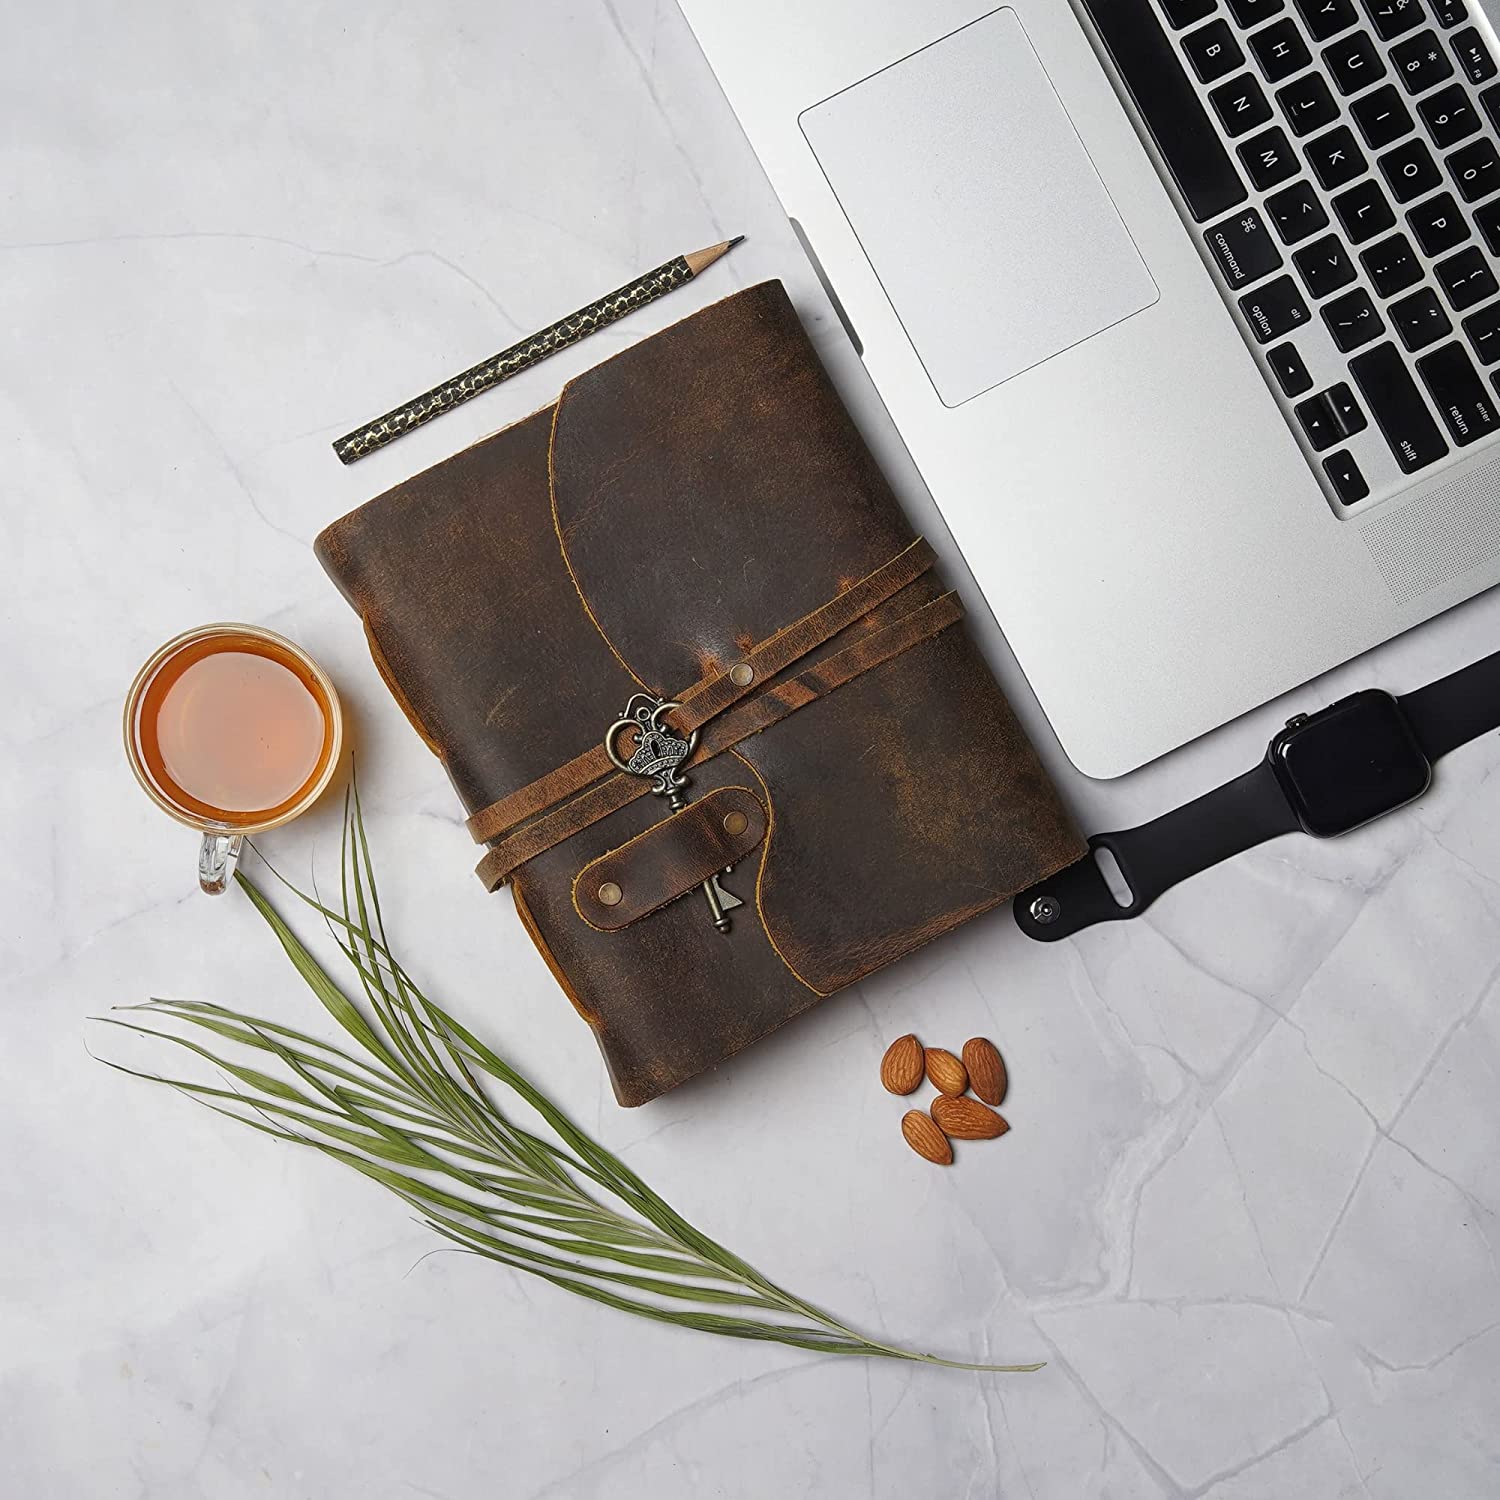 A brown leather vintage journal with key on a desk.